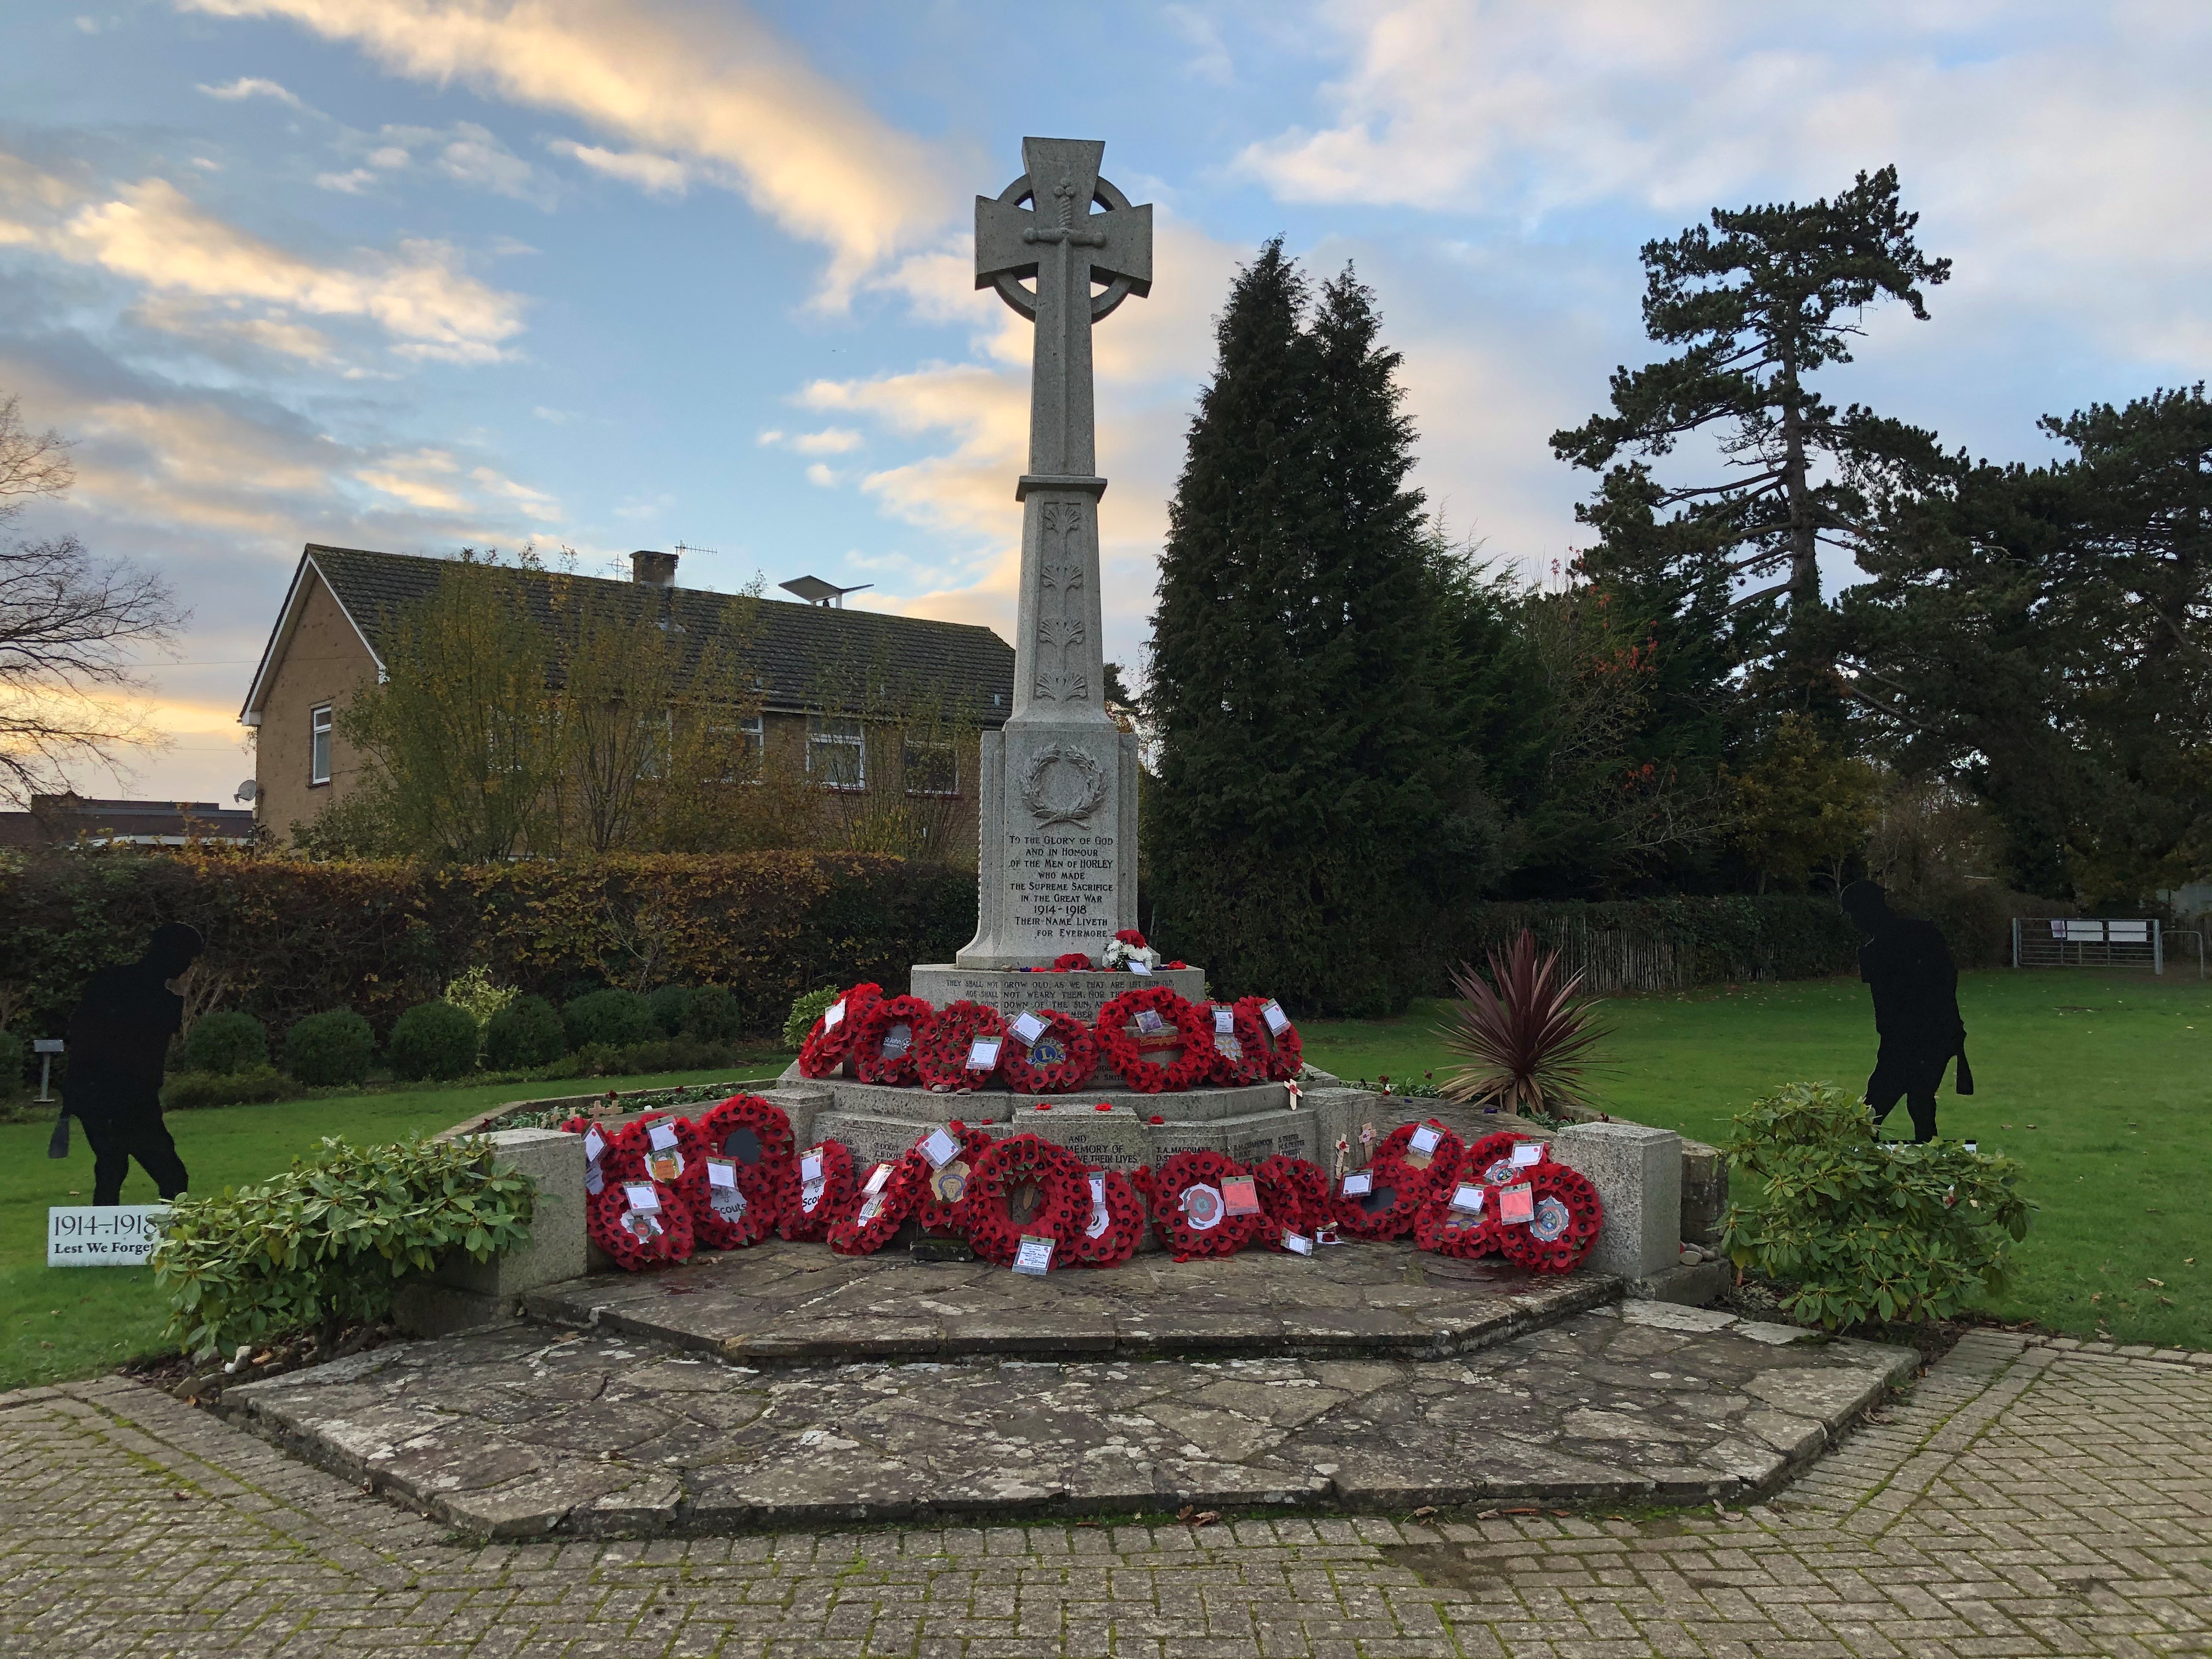 A photo of the Horley War Memorial during Remembrance 2020